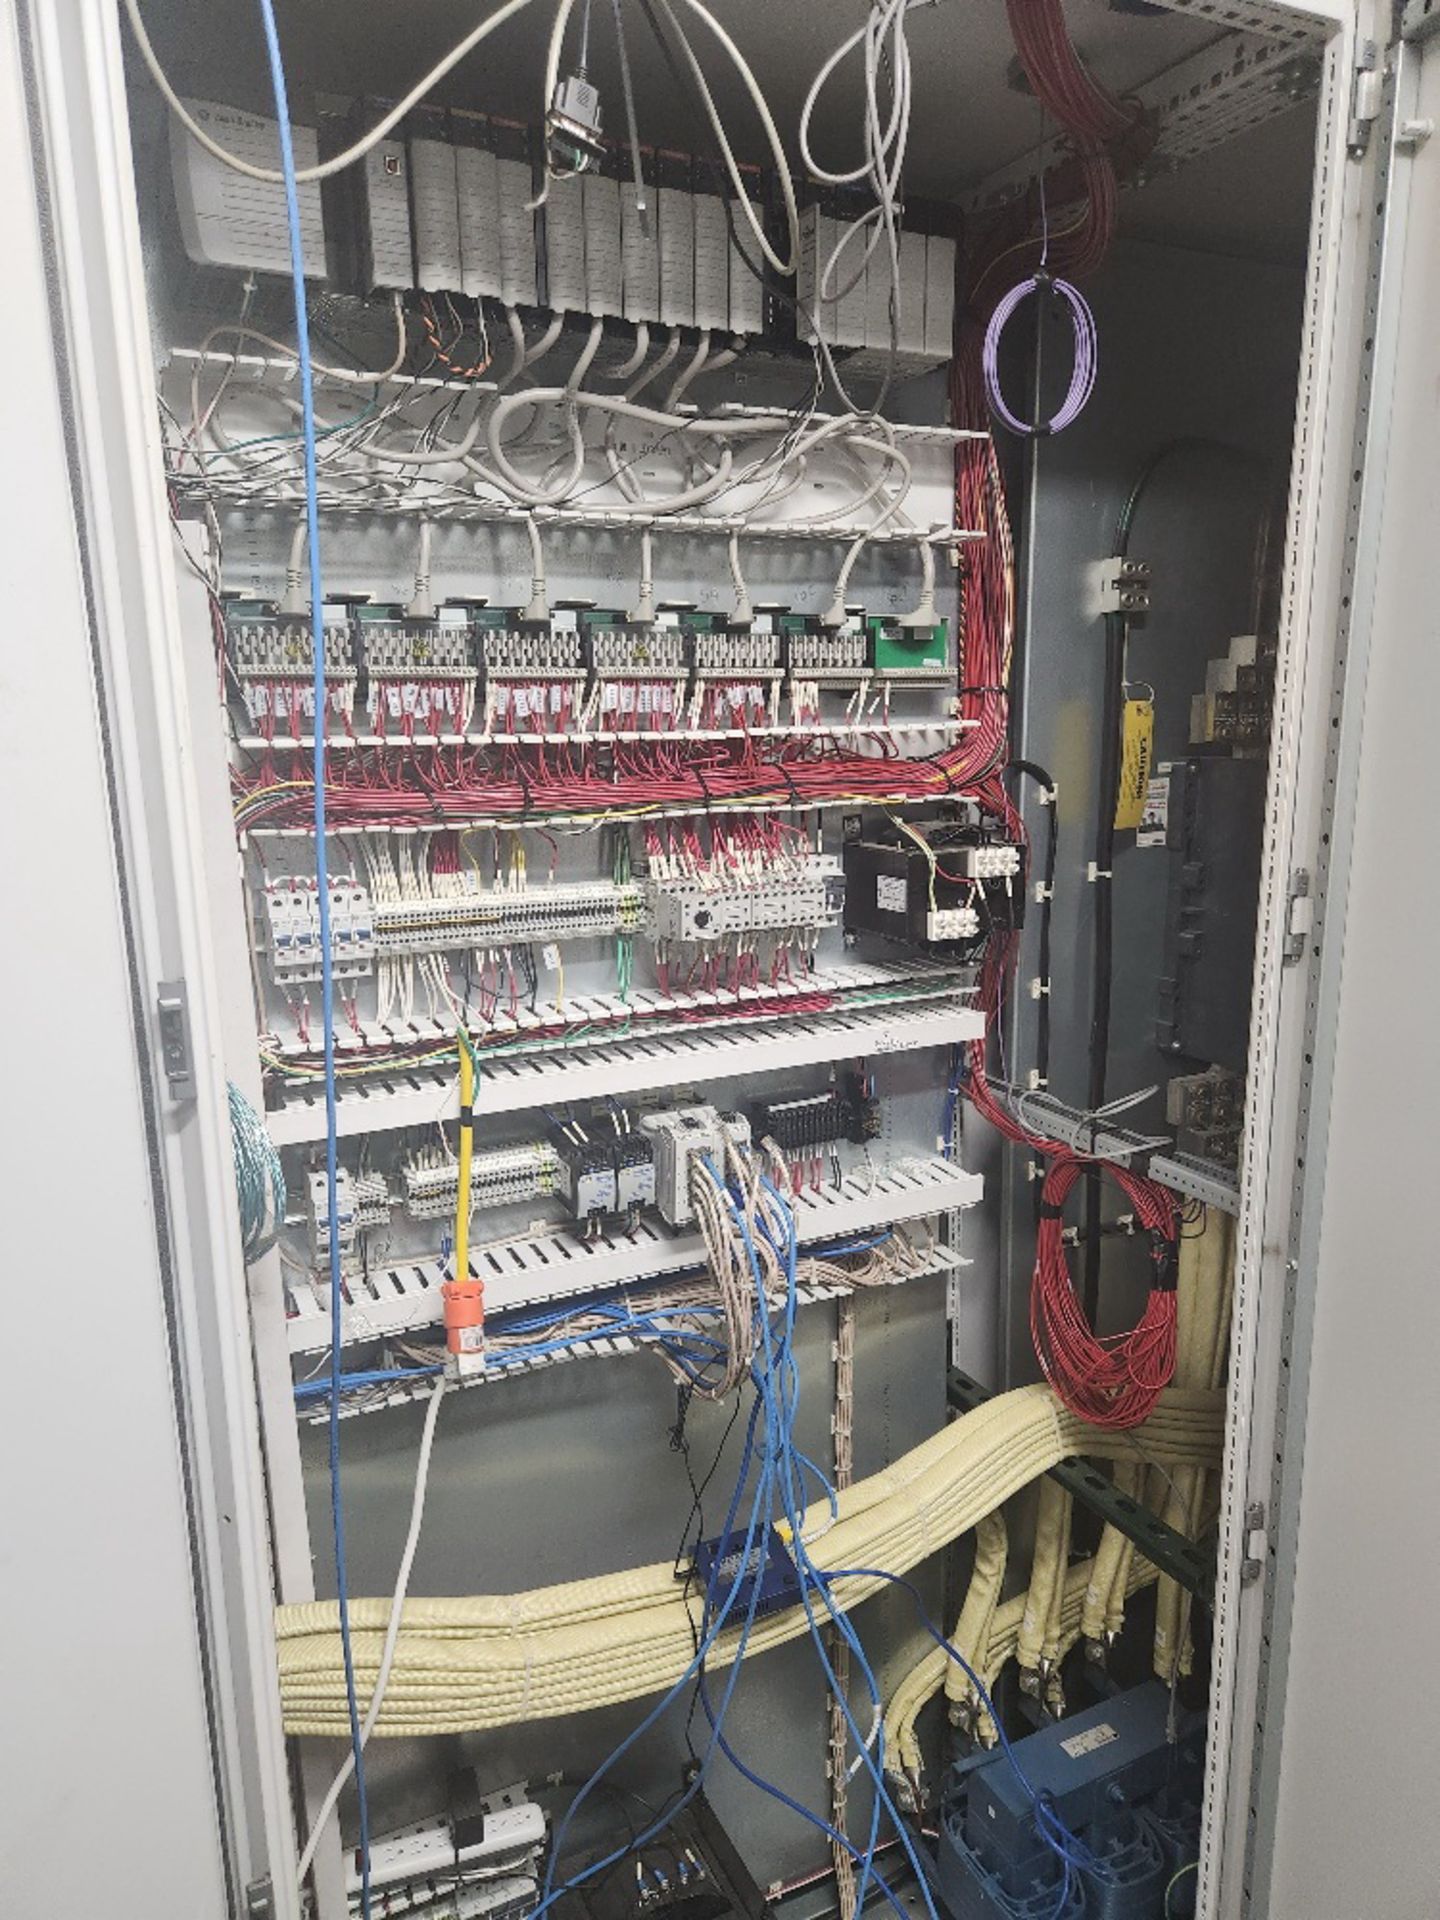 Rockwell Automation Electrical Panels - Image 8 of 15